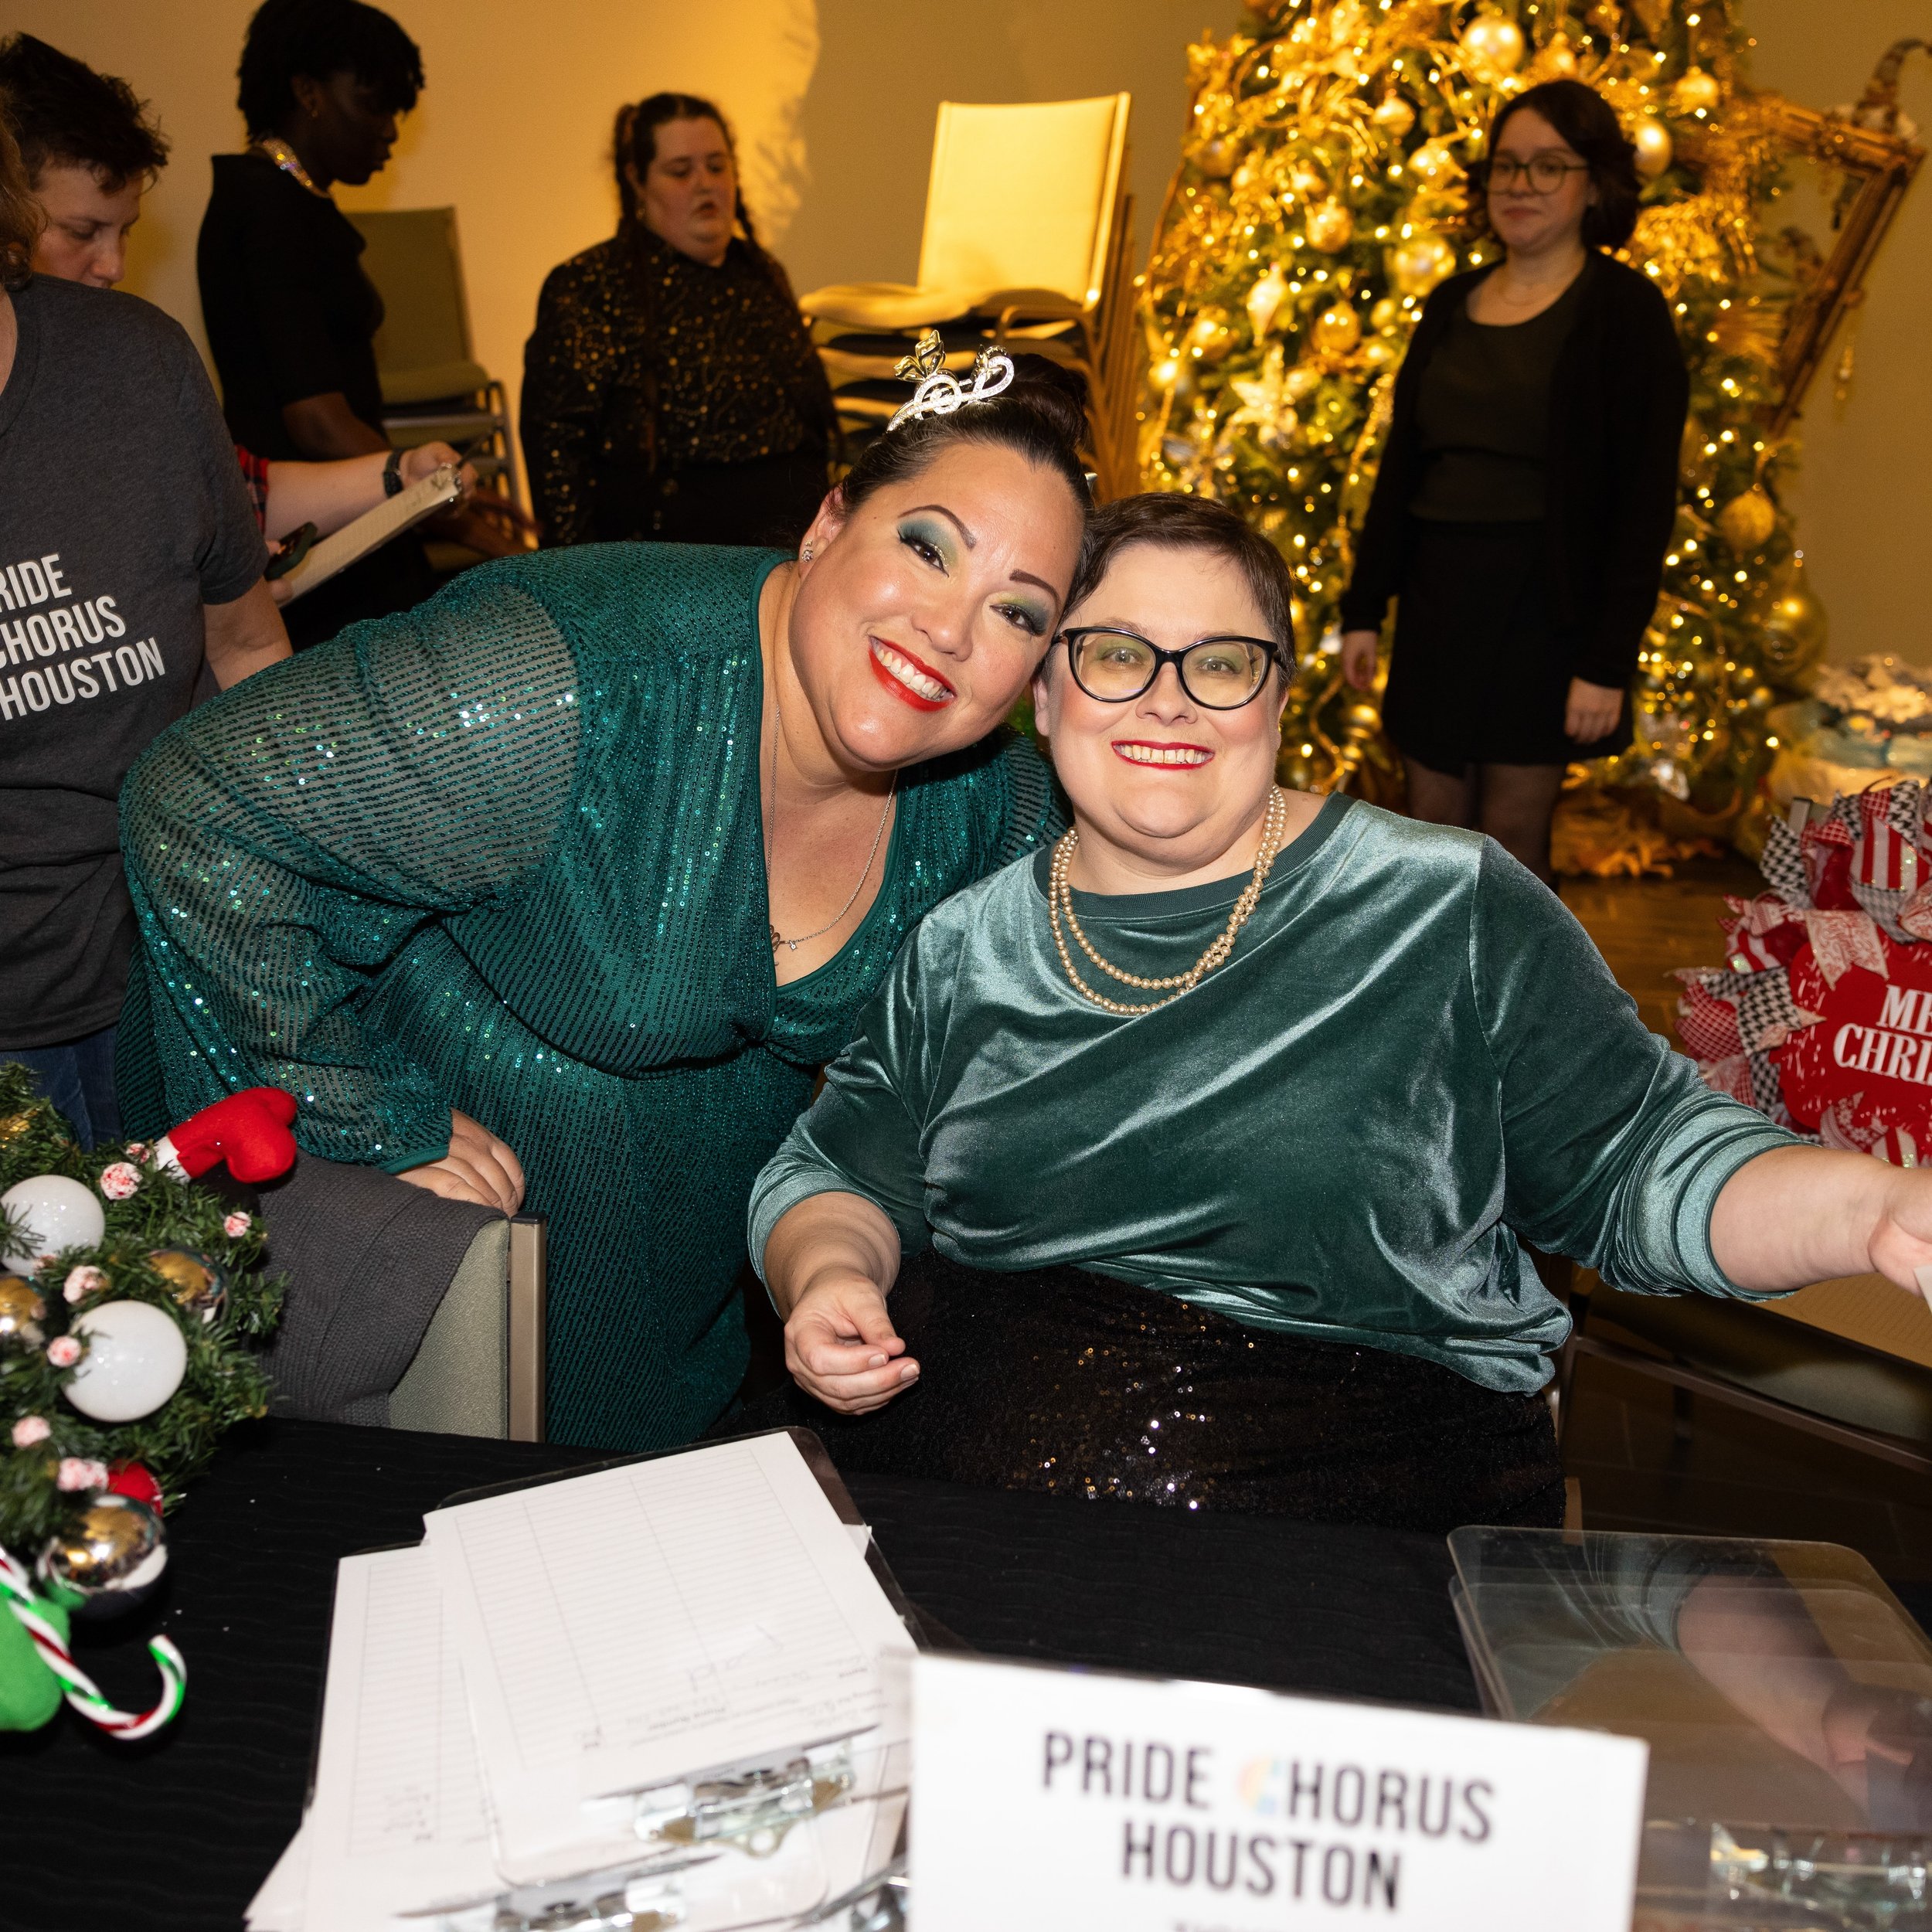 Happy birthday to Nadine! Nadine (left) is our Outreach Chair and every year organizes an amazing silent auction of homemade wreaths for the chorus. Help us wish her an amazing day!

#pridechorus #pridechorushouston #pridechorushtx⁠ #pride #pridemont